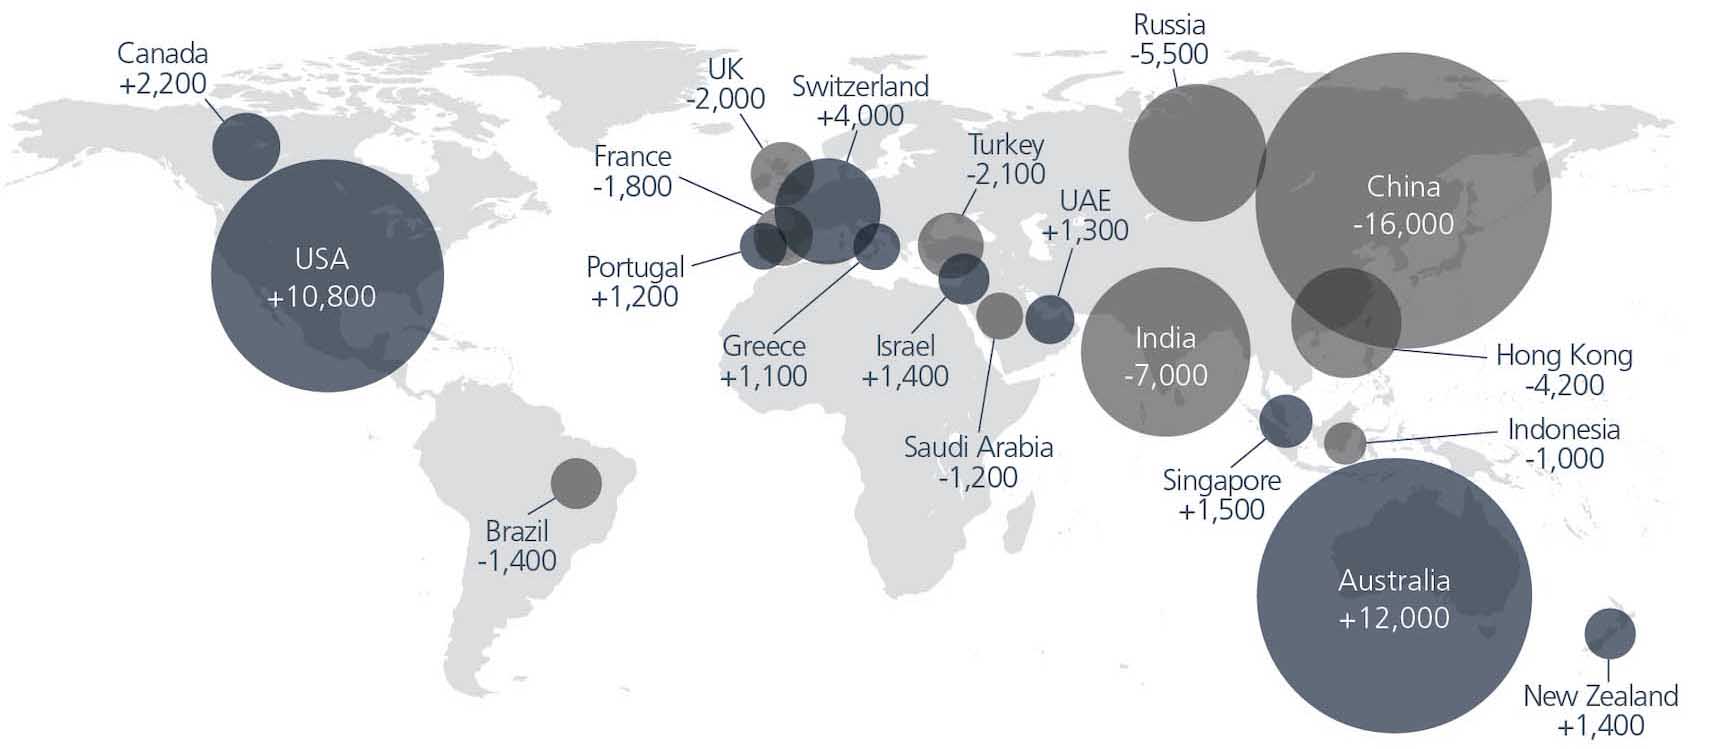 Migration Map of Top countries gaining or losing millionaires in 2019